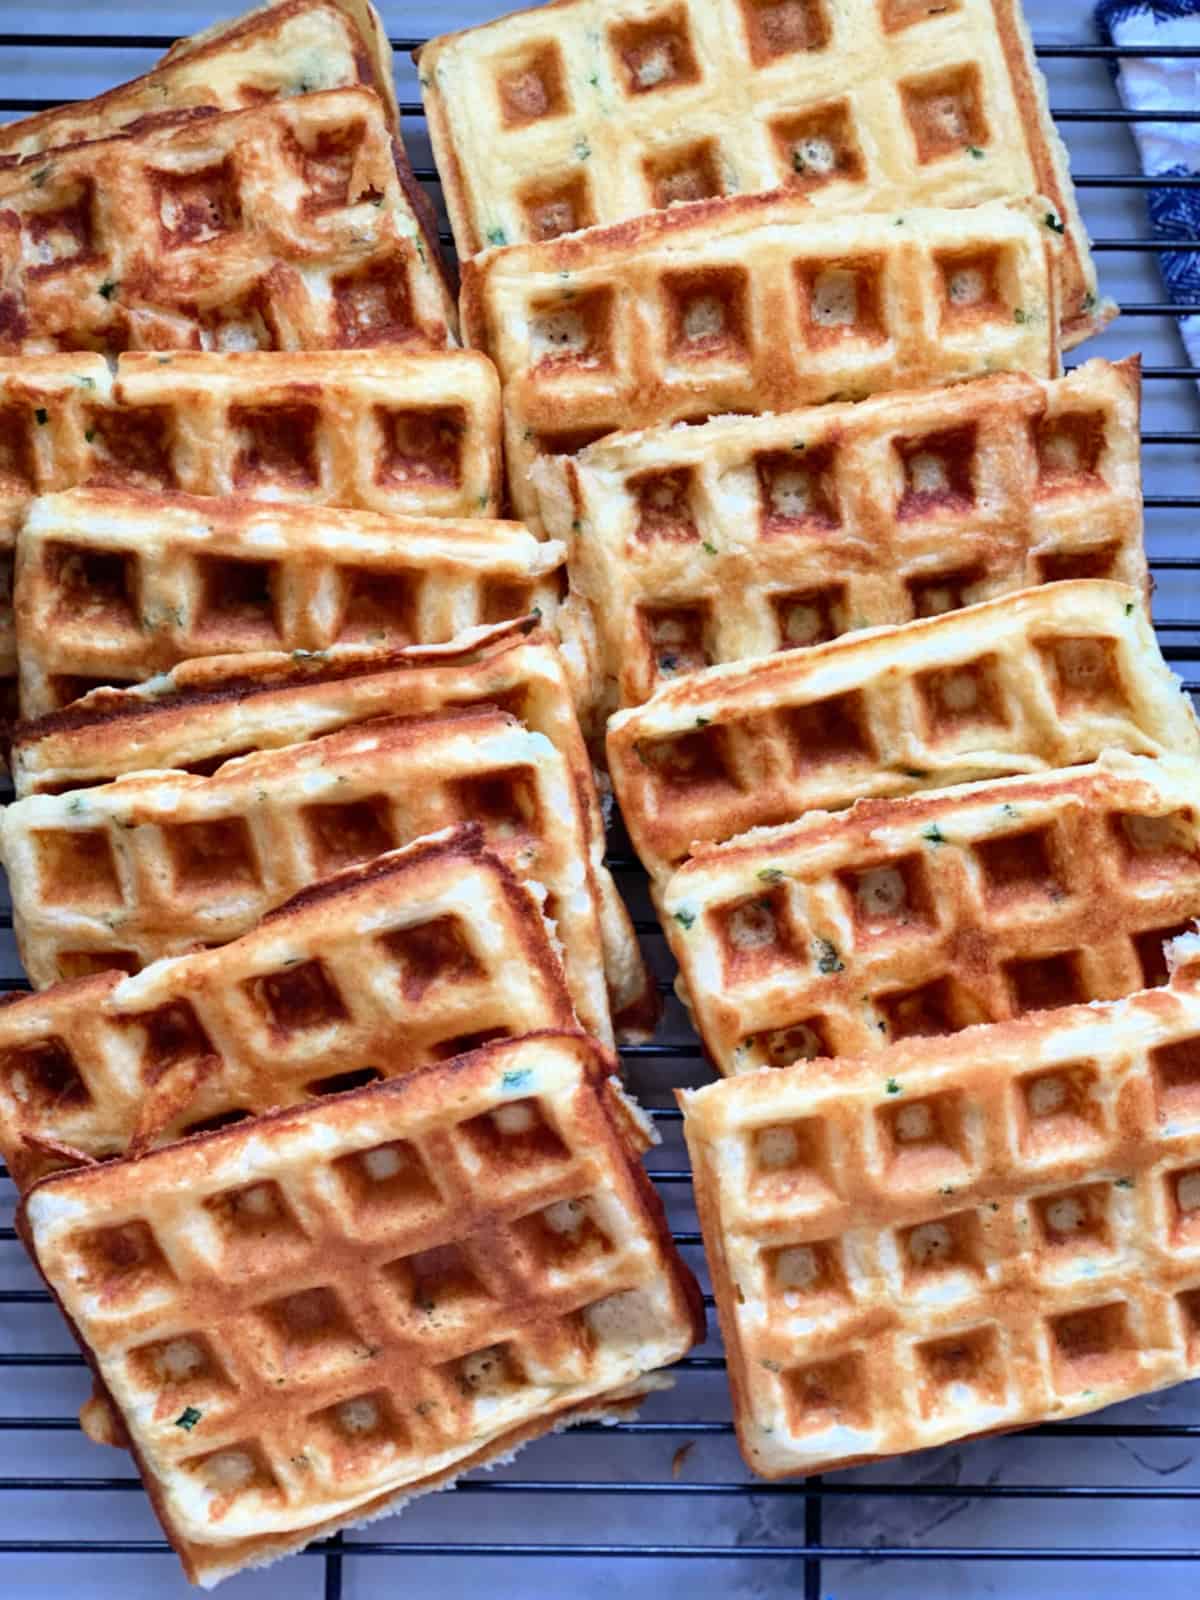 Top view of 14 waffles stacked on a wire rack cooling.